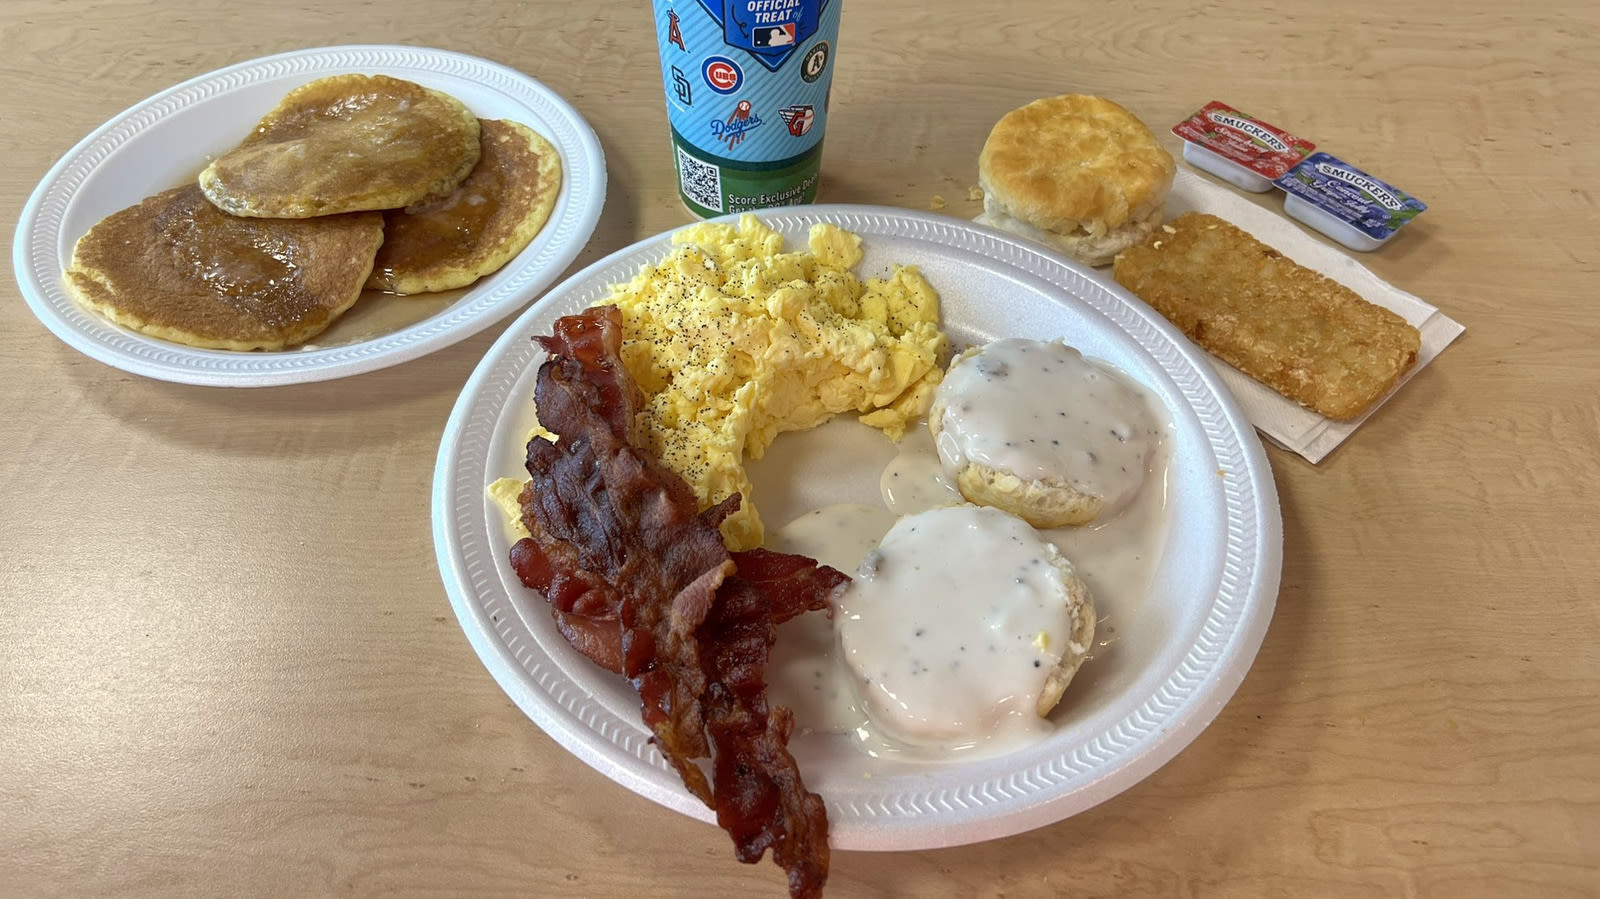 Does Dairy Queen Serve Breakfast At Every Location?